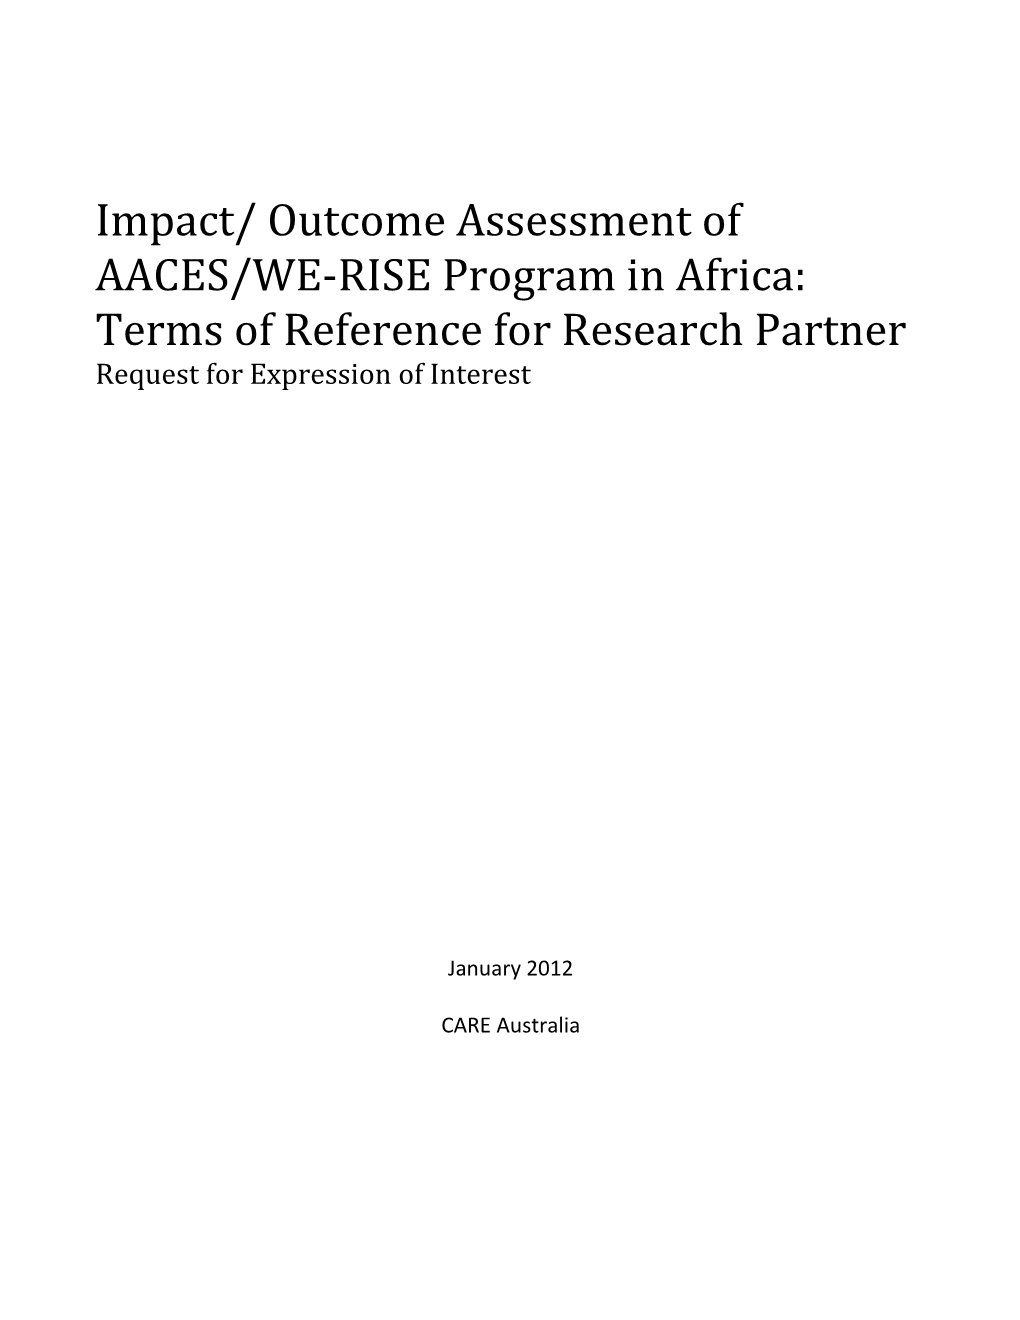 Impact/ Outcome Assessment of AACES/WE-RISE Program in Africa: Terms of Reference for Research